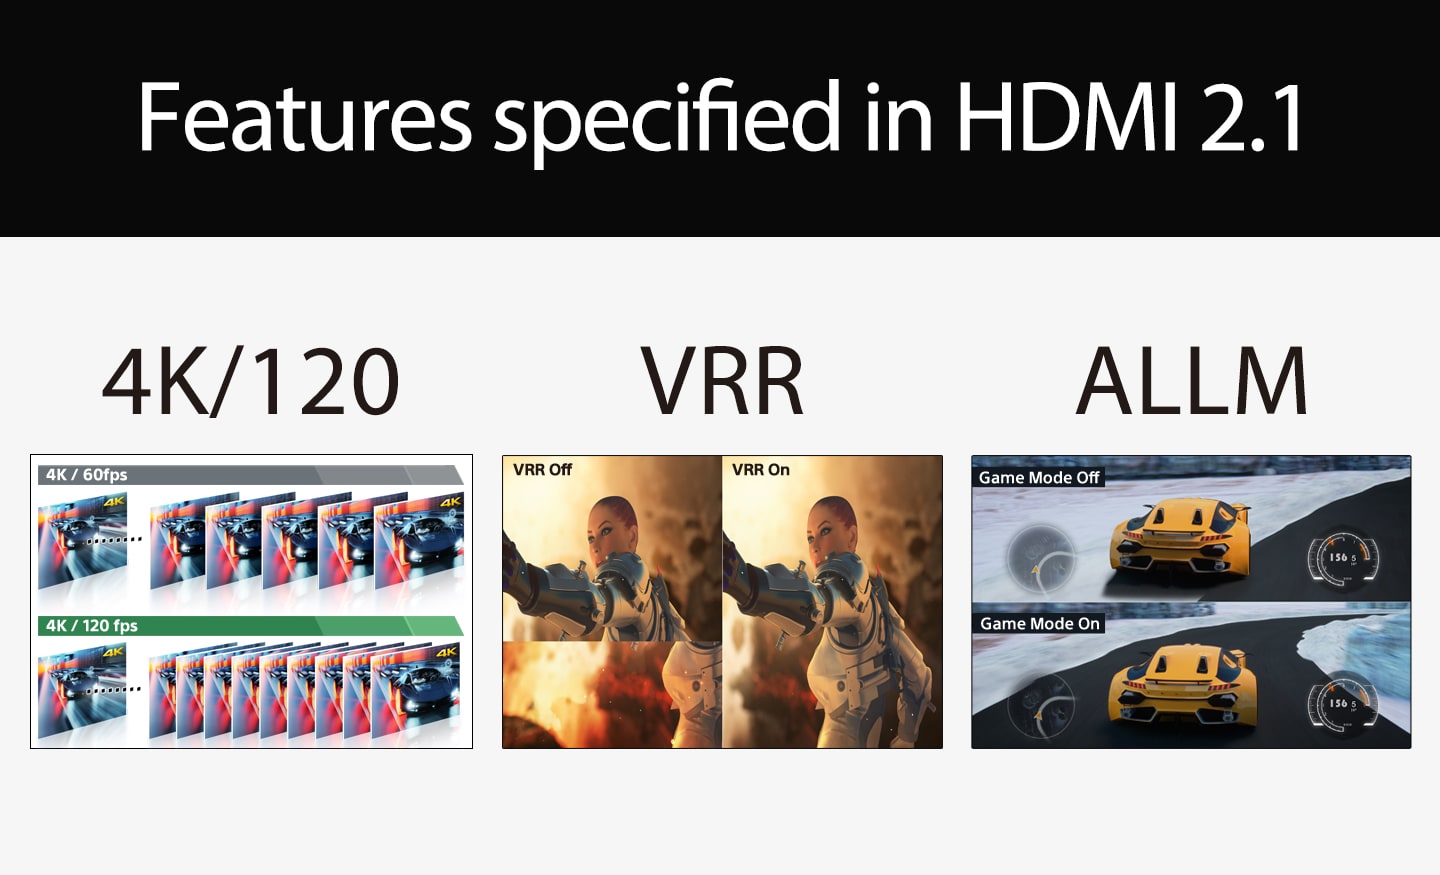 HDMI 2.1 Features such as 4k/120hz, VRR, and ALLM.